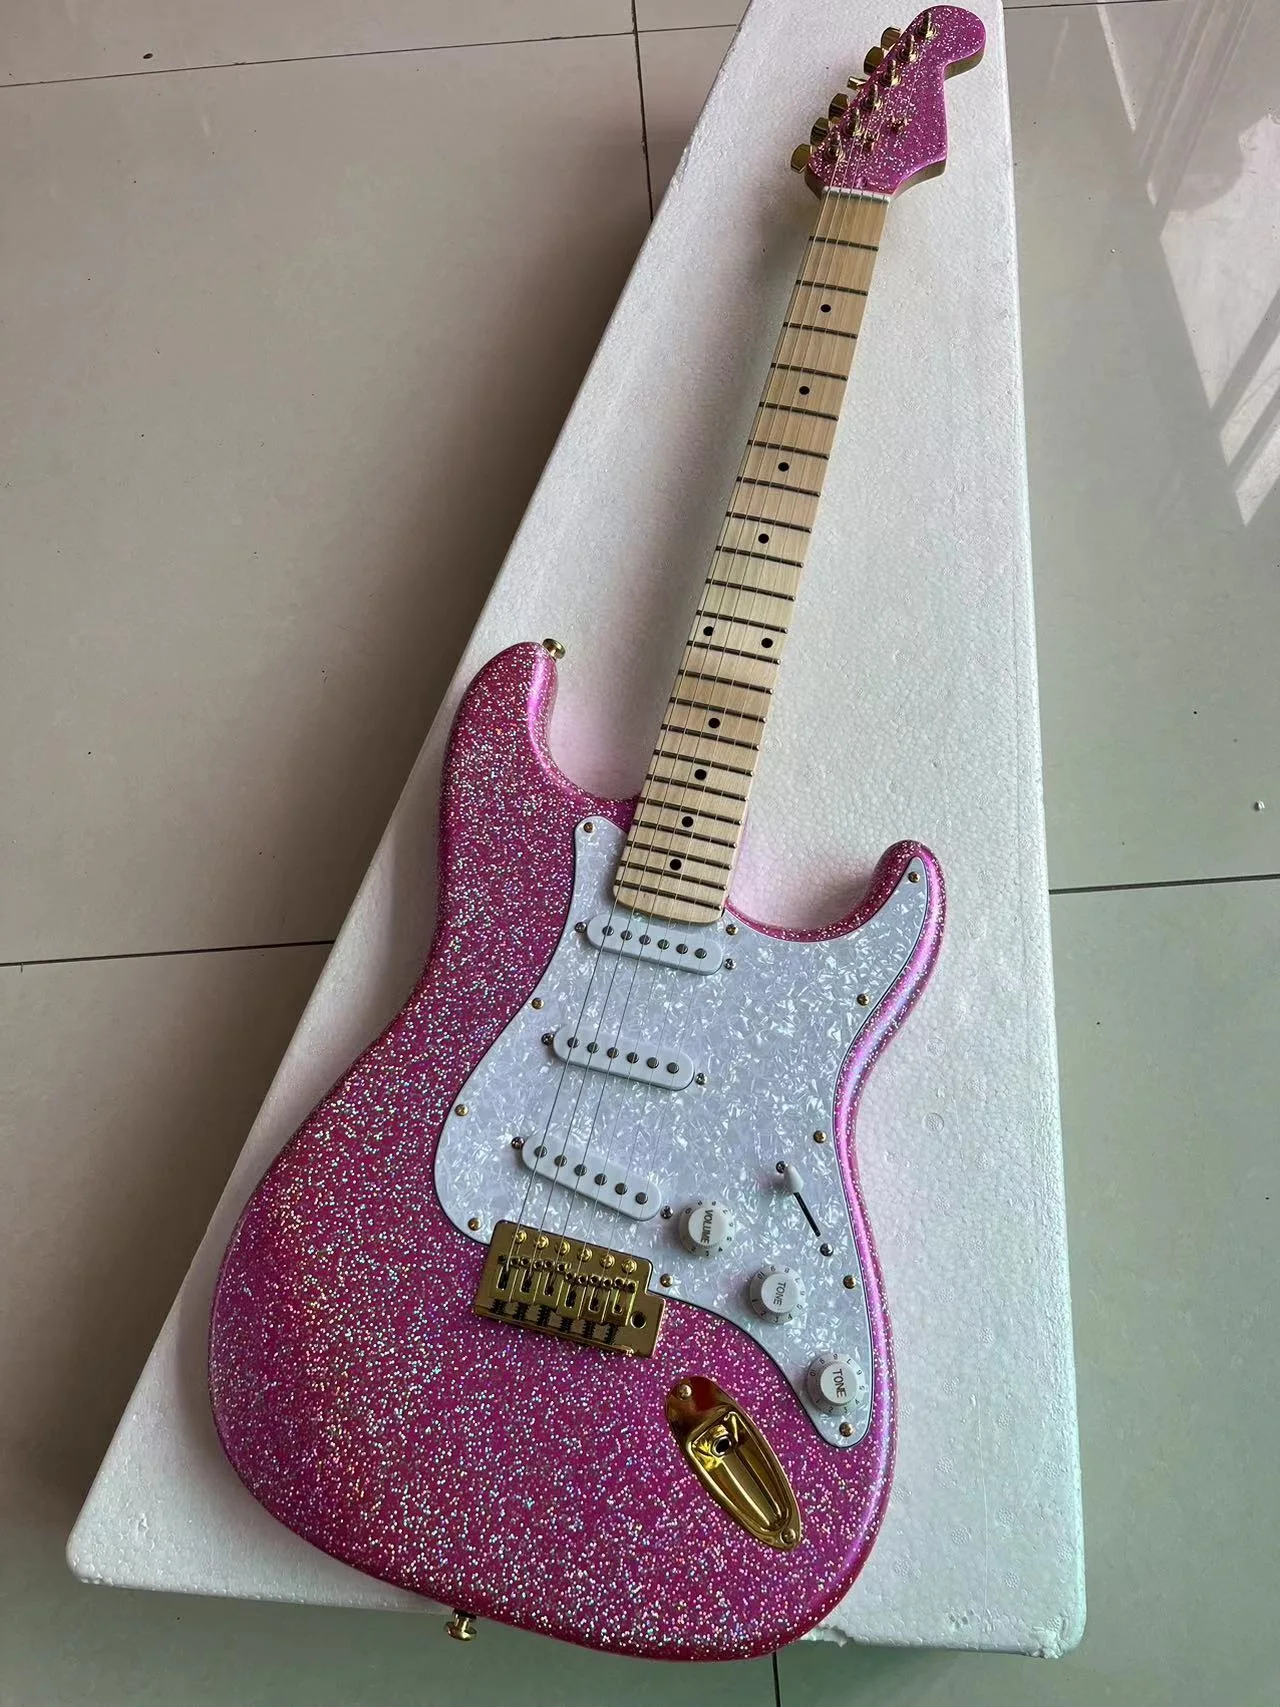 

High Quality Custom Body 6 String Wooden Bling Purple ST Electric Guitar 22 Fret Special Price Package Super Value Only